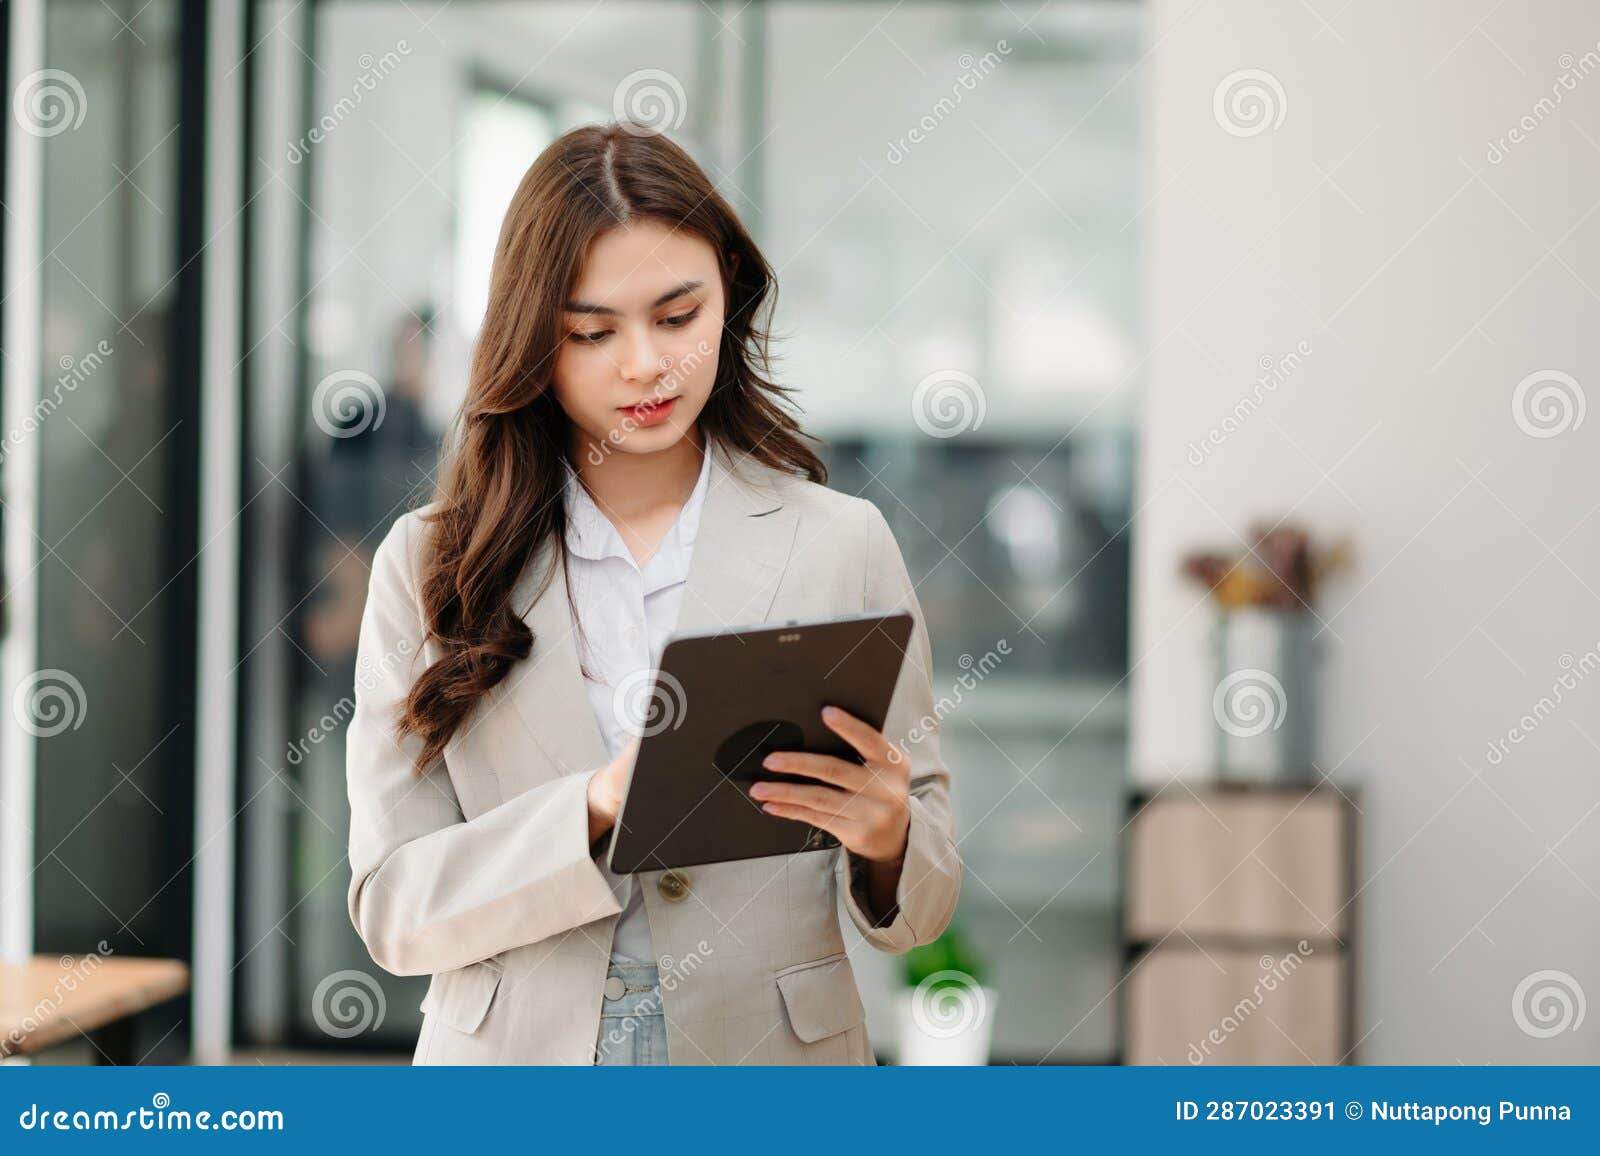 confident woman with a smile standing holding notepad and tablet at the ffice